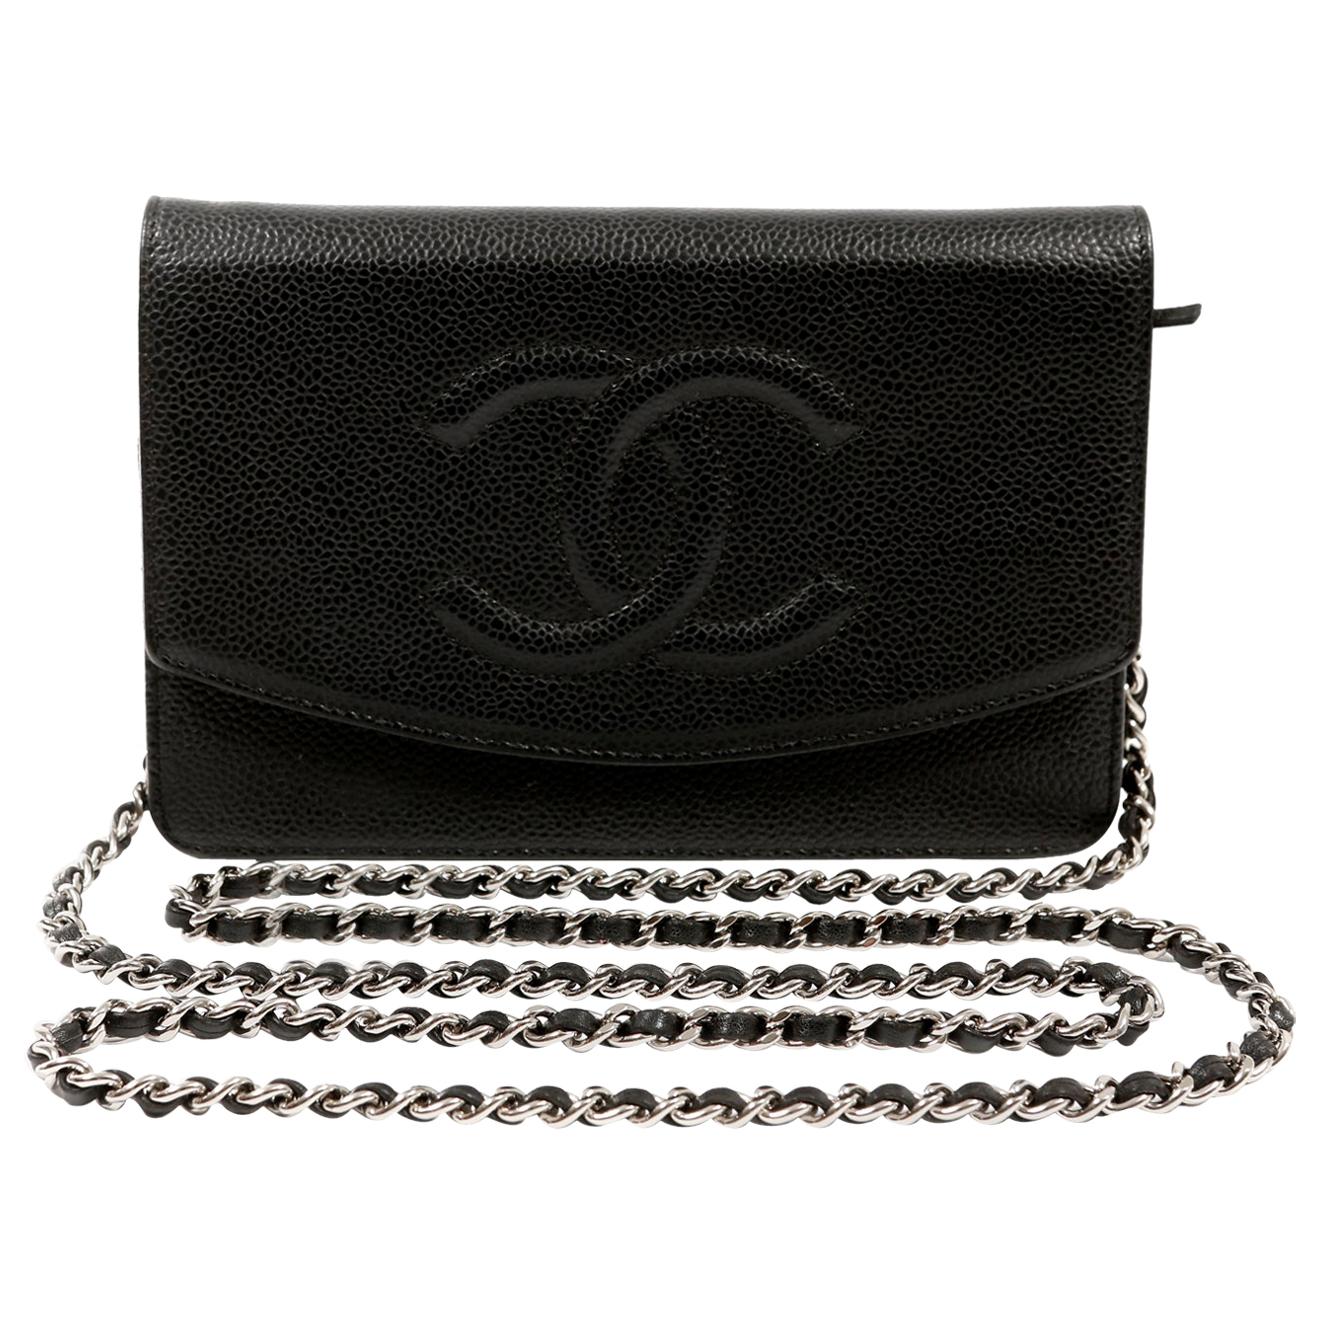 Chanel Black Caviar Timeless Wallet on a Chain with Silver